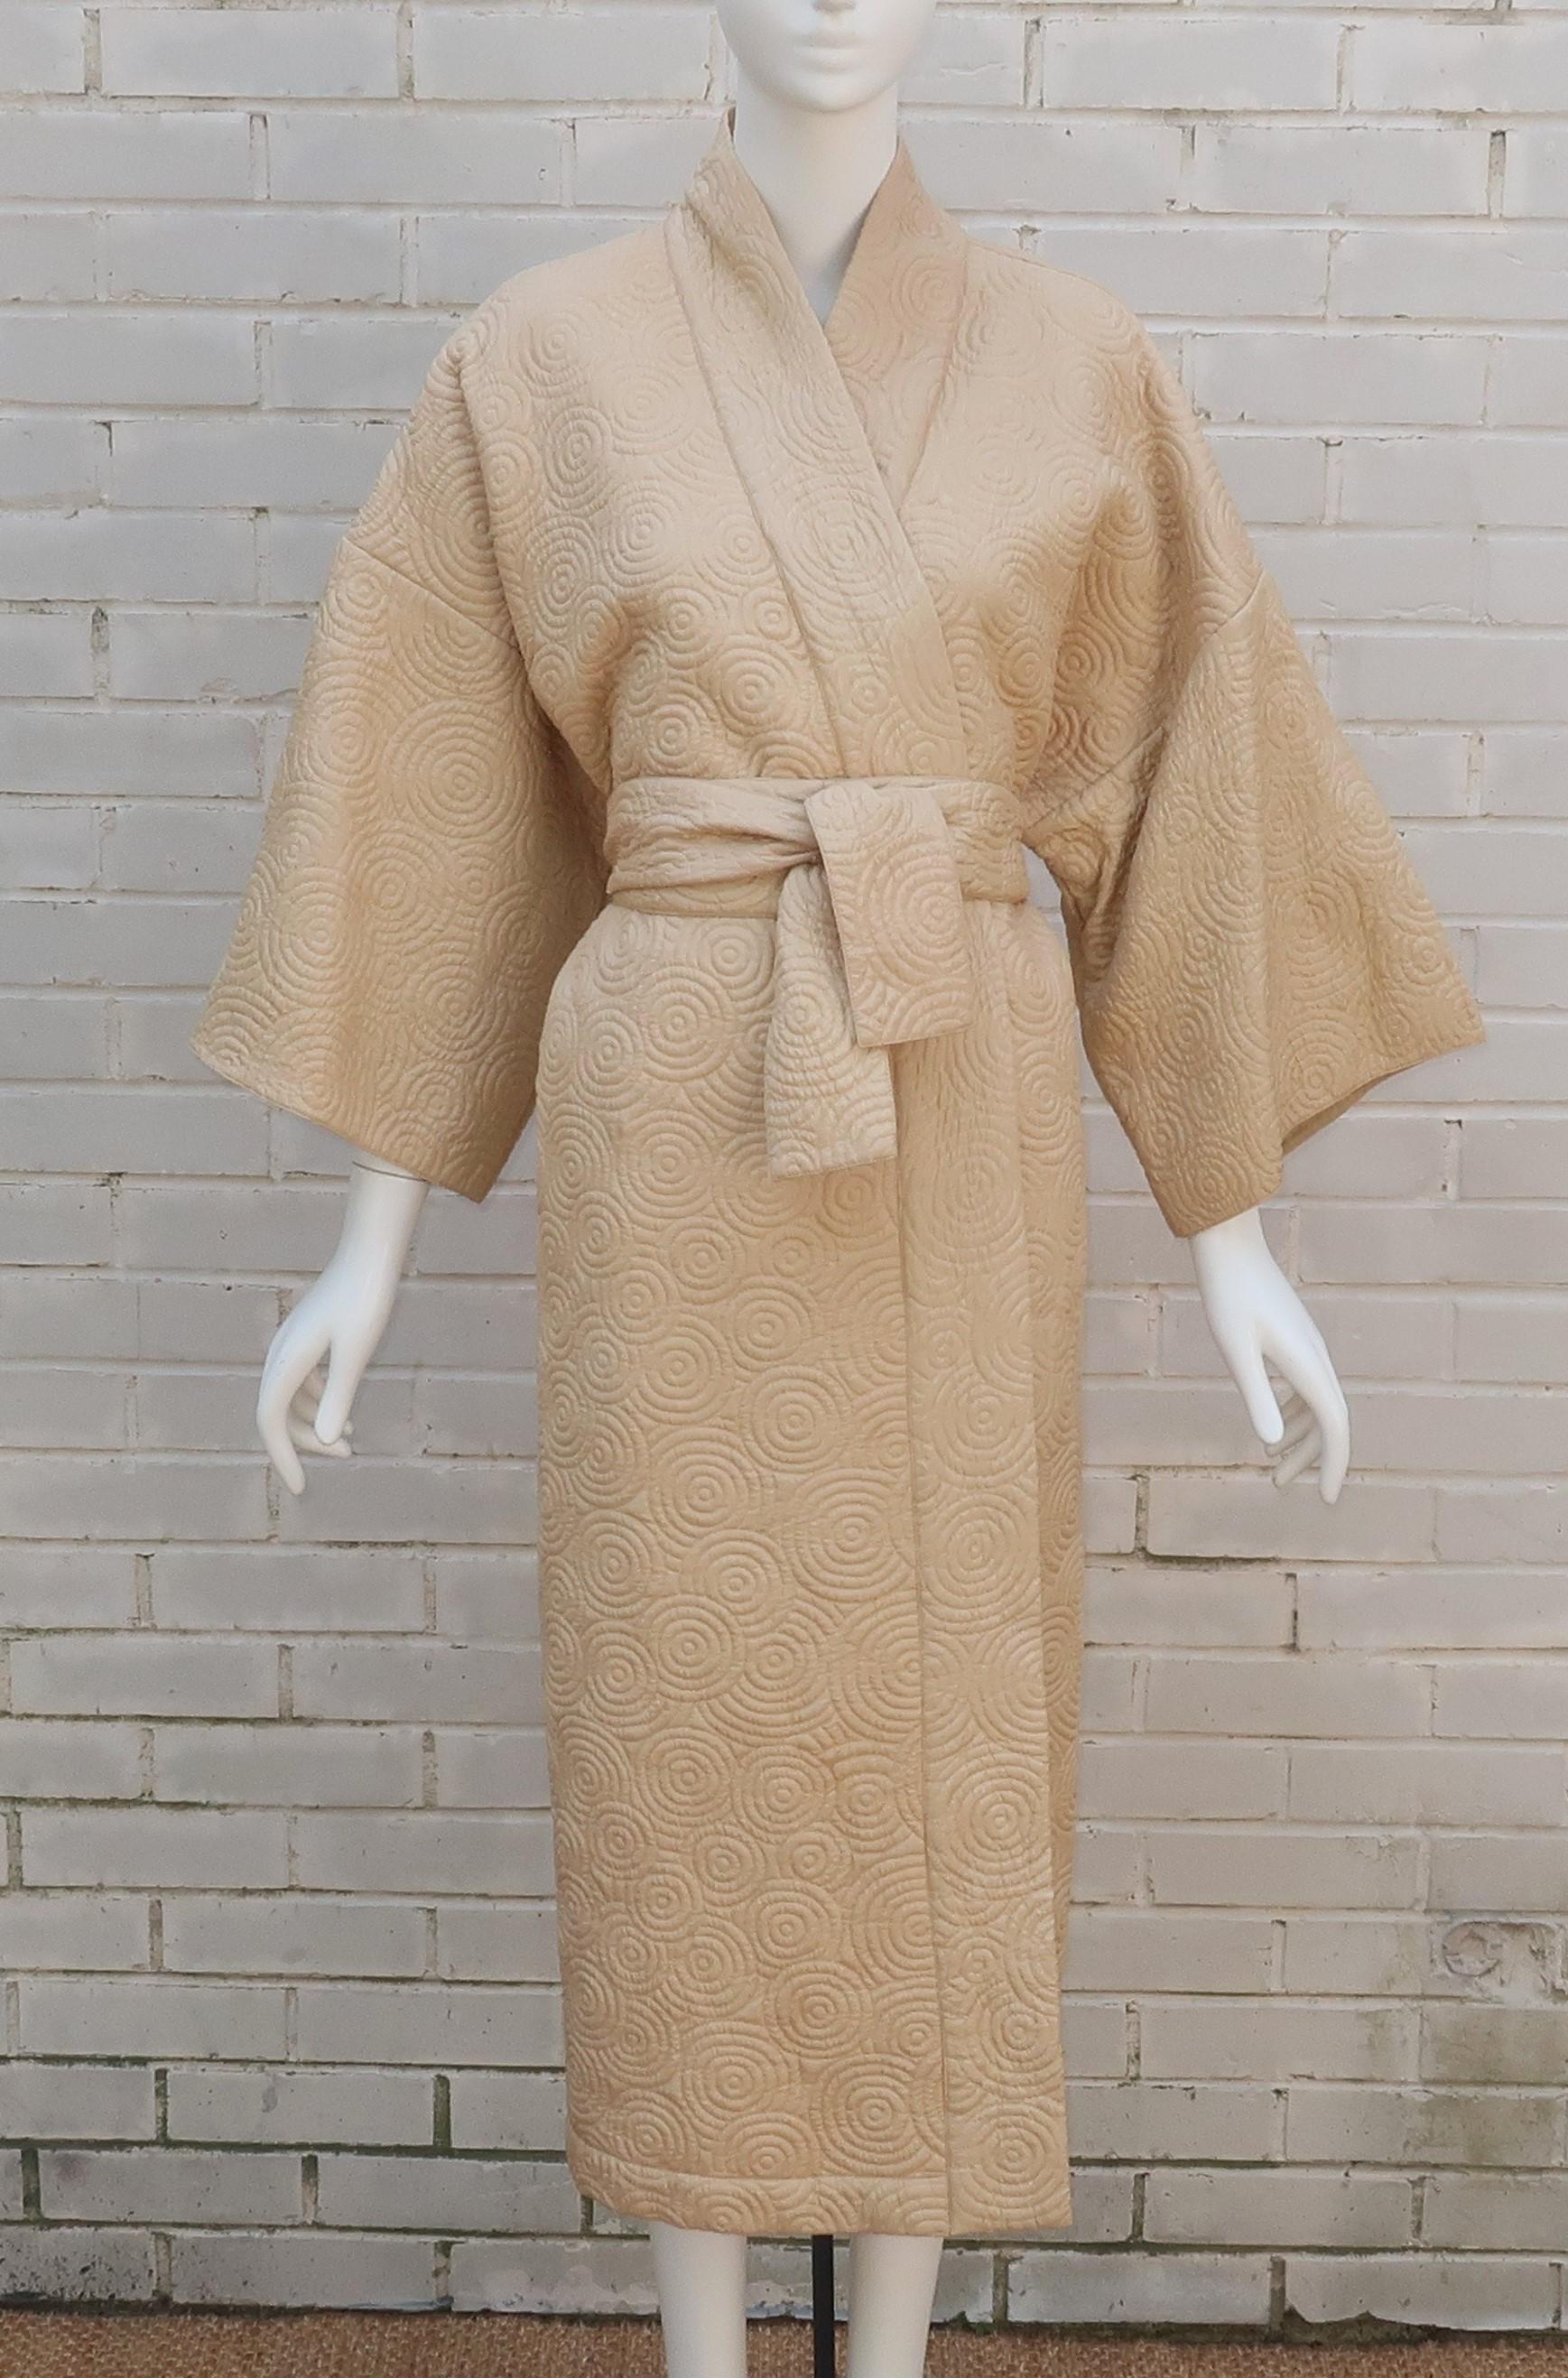 Relax in style with a Natori quilted silk robe in a lovely shade of champagne beige.  The kimono style silhouette has a classic open front, bell sleeves and wide sash belt.  There are hidden pockets on the side and a full lining.  The quilting has